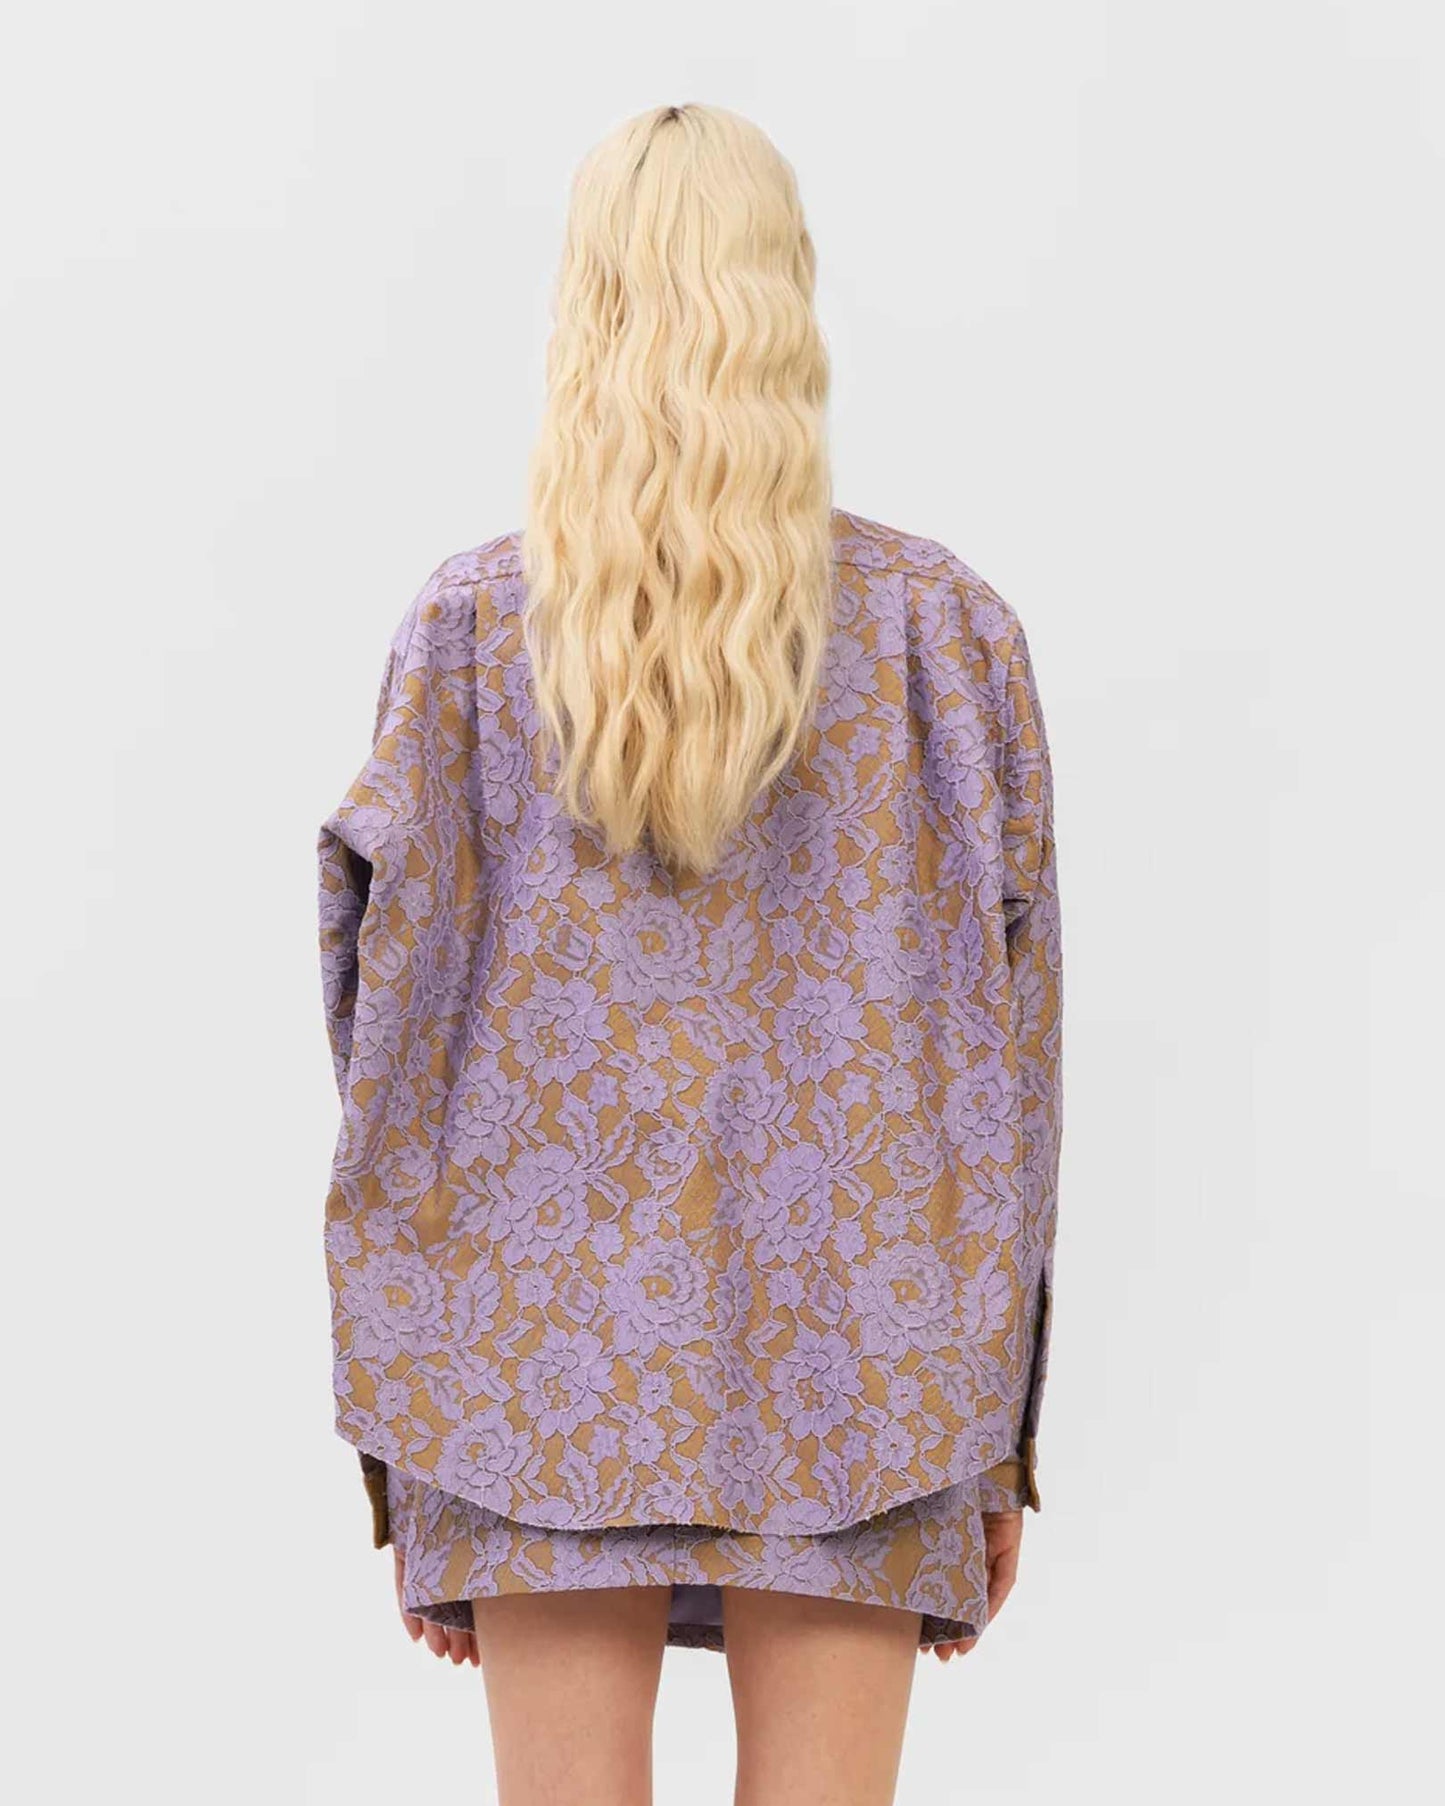 AKNVAS Lace Shirt in Amethyst available at Lahn.shop